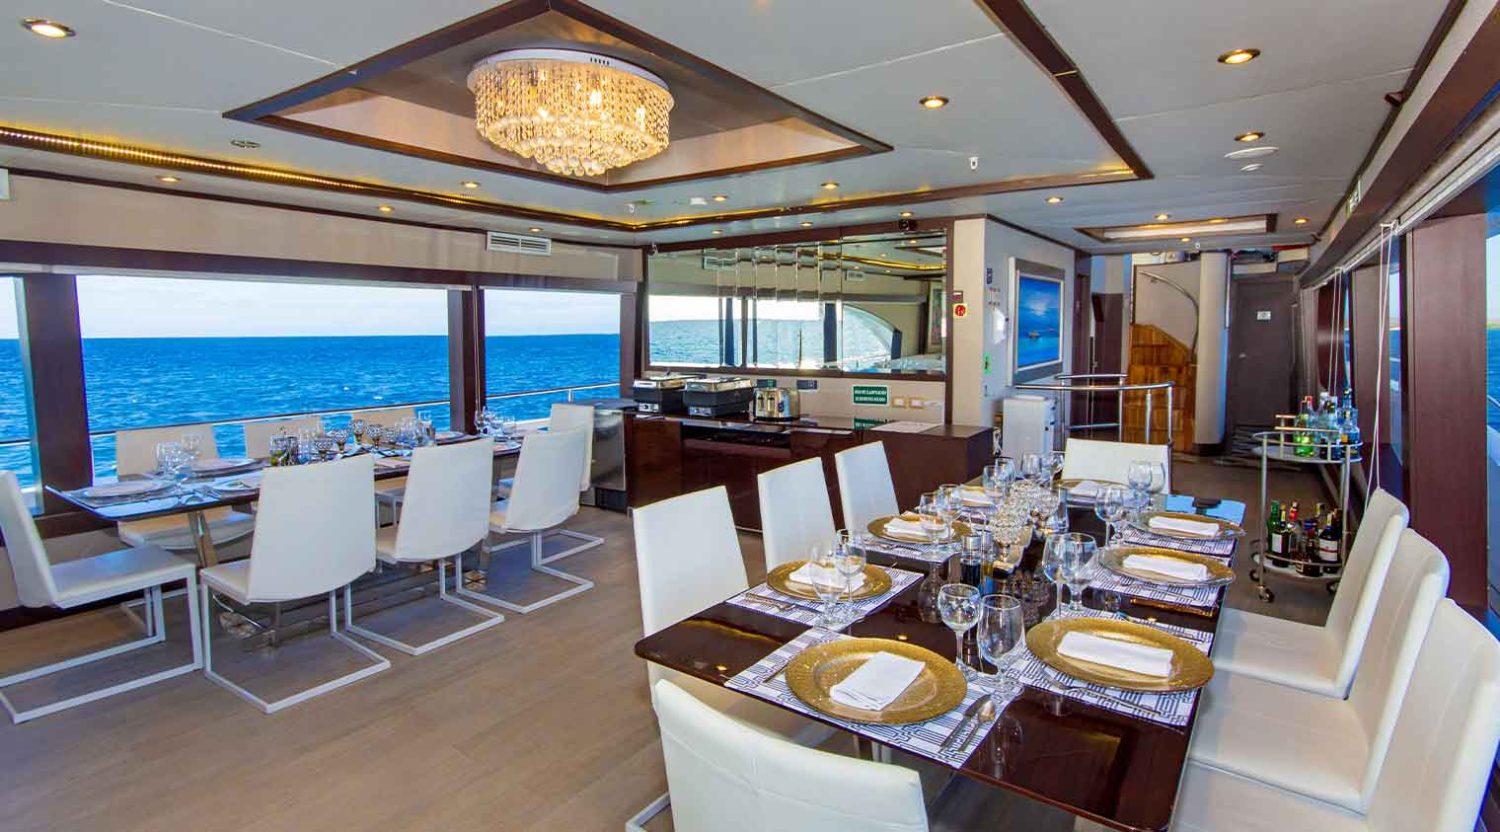 grand majestic galapagos yacht dining room in the day of galapagos islands tours